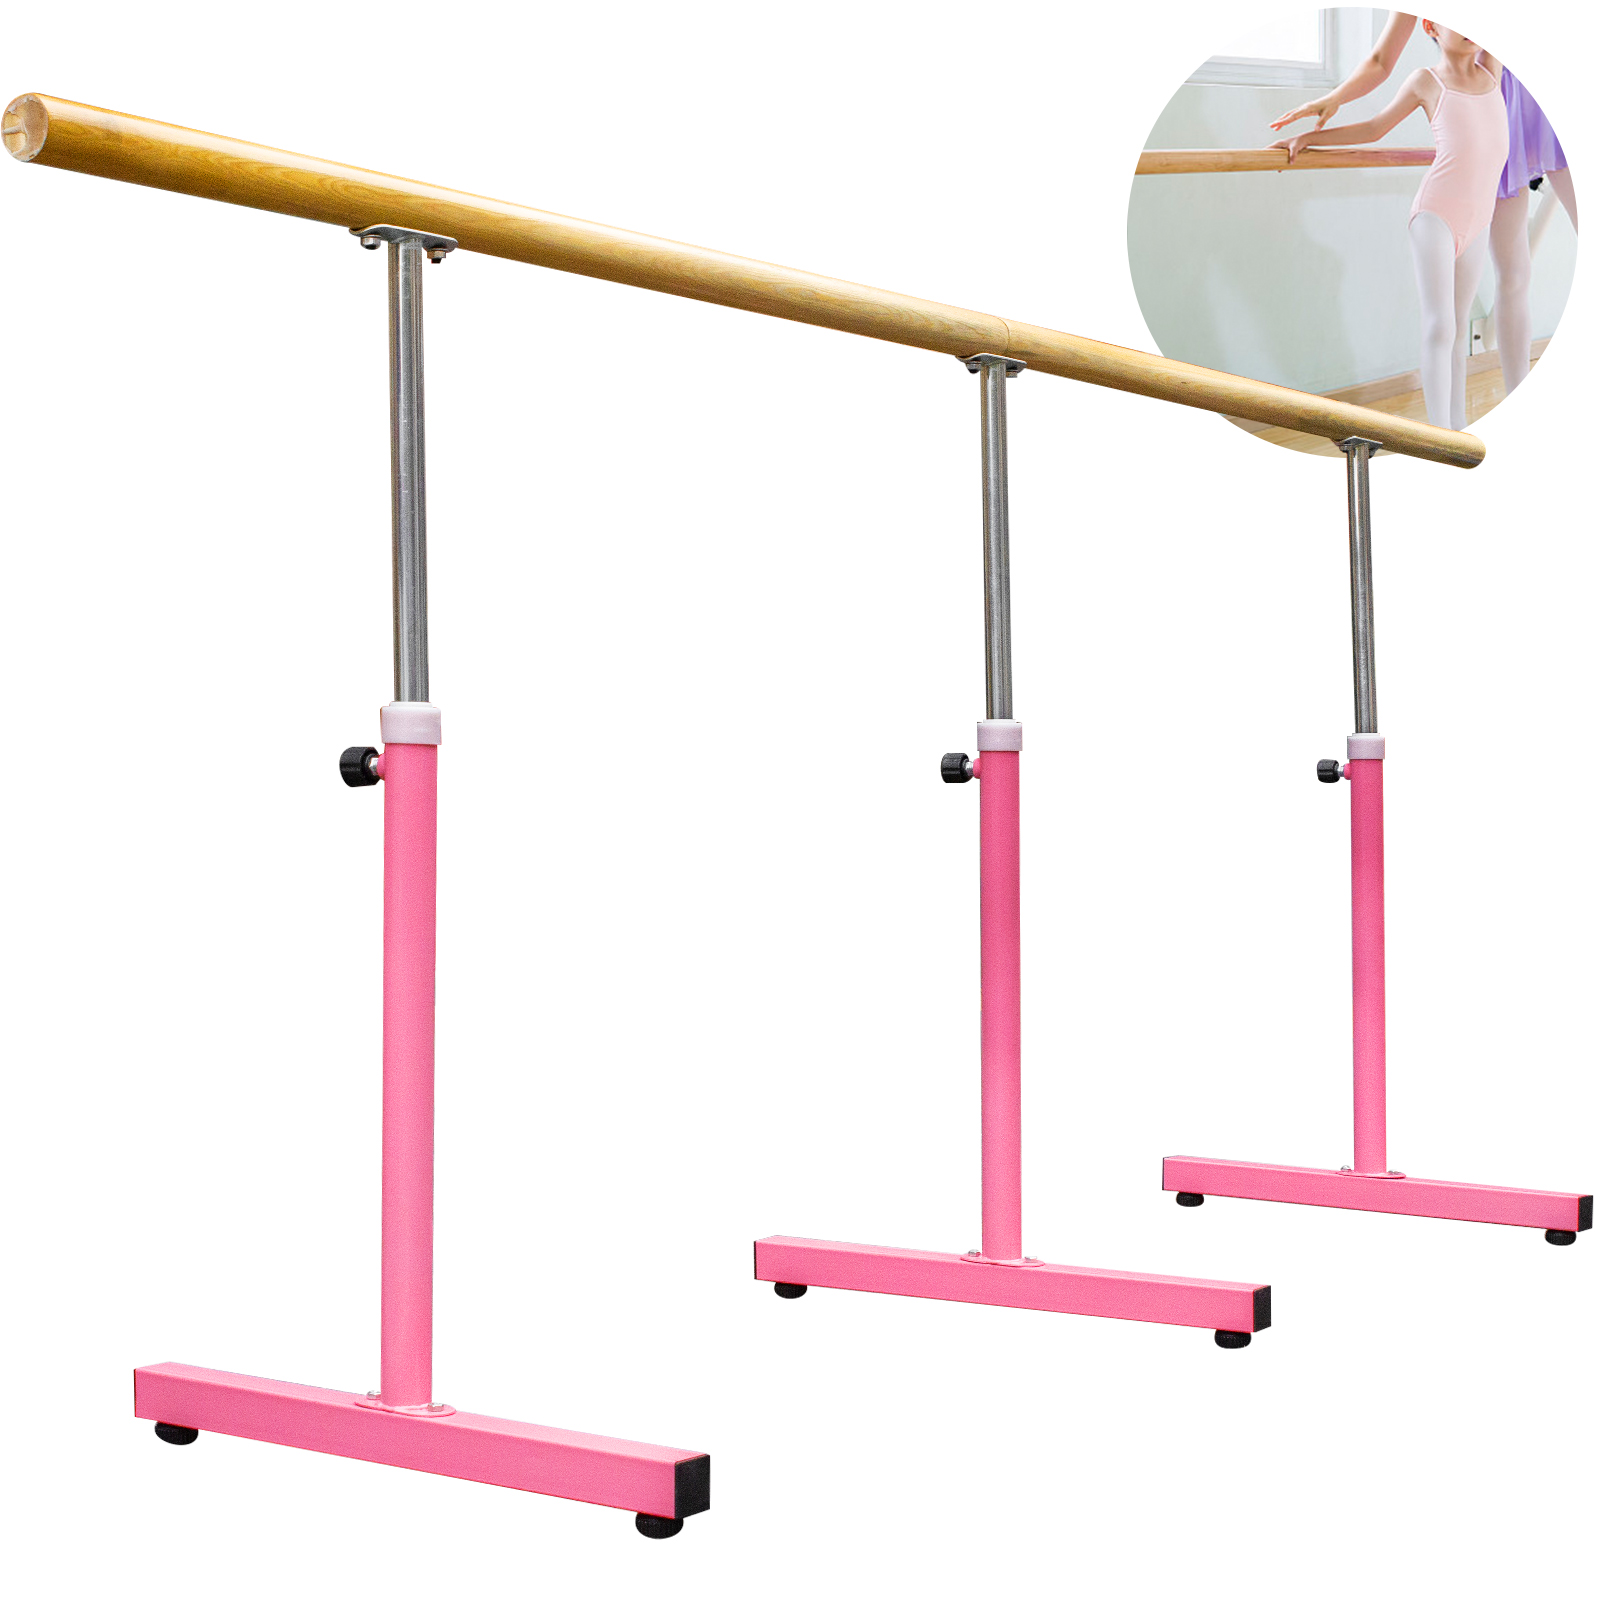 Ballet Barre Portable for Home or Studio Premium Quality freestanding  Adjustable for Adults and Kids Stretch Balance Do a Barre Workout or Dance